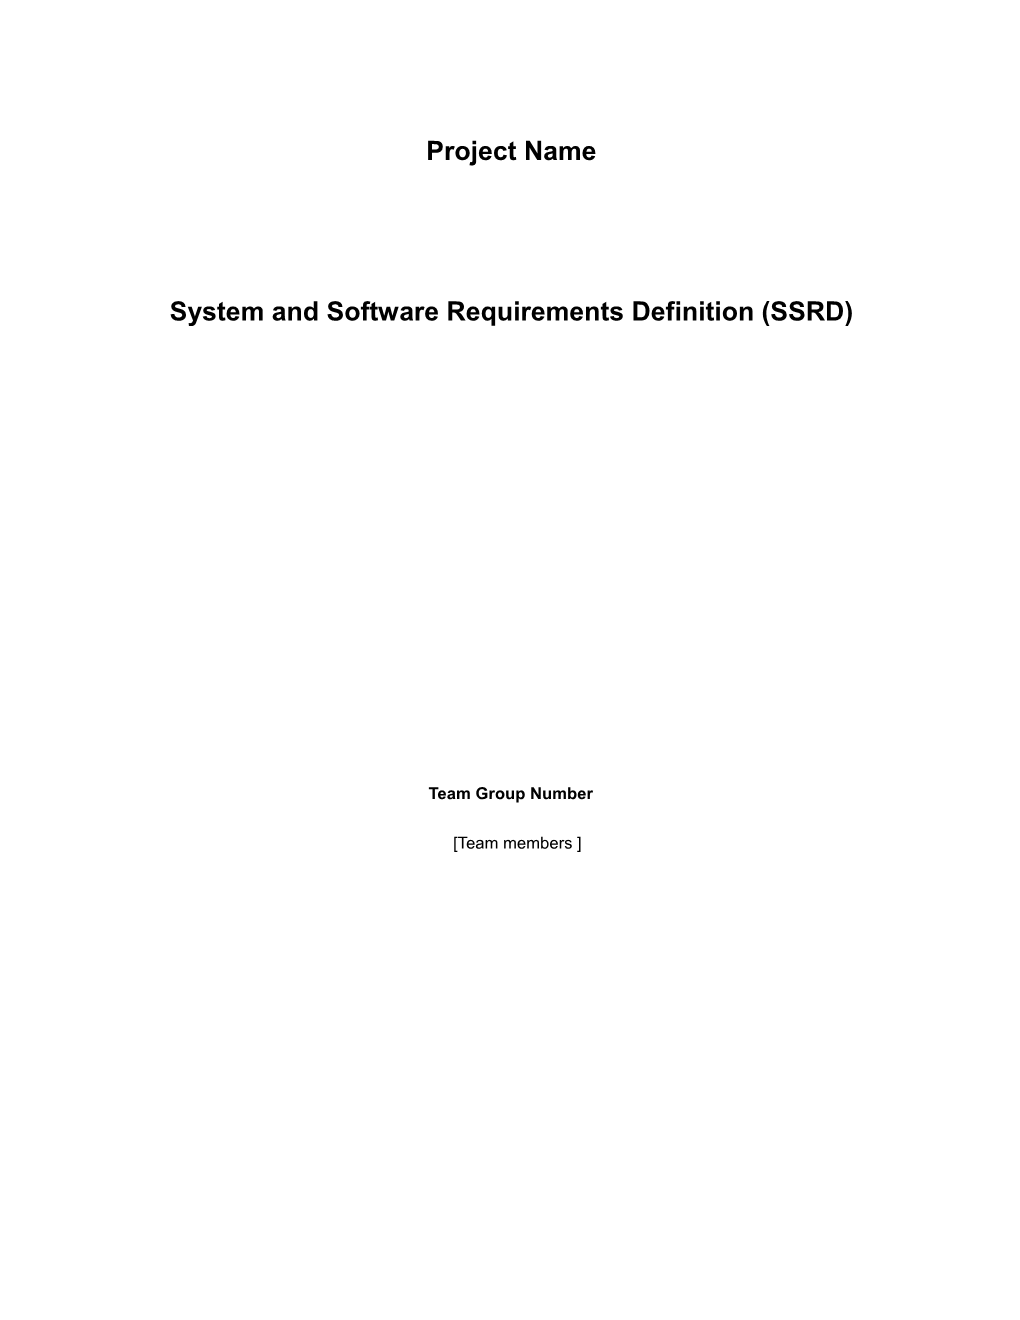 System and Software Requirements Definition